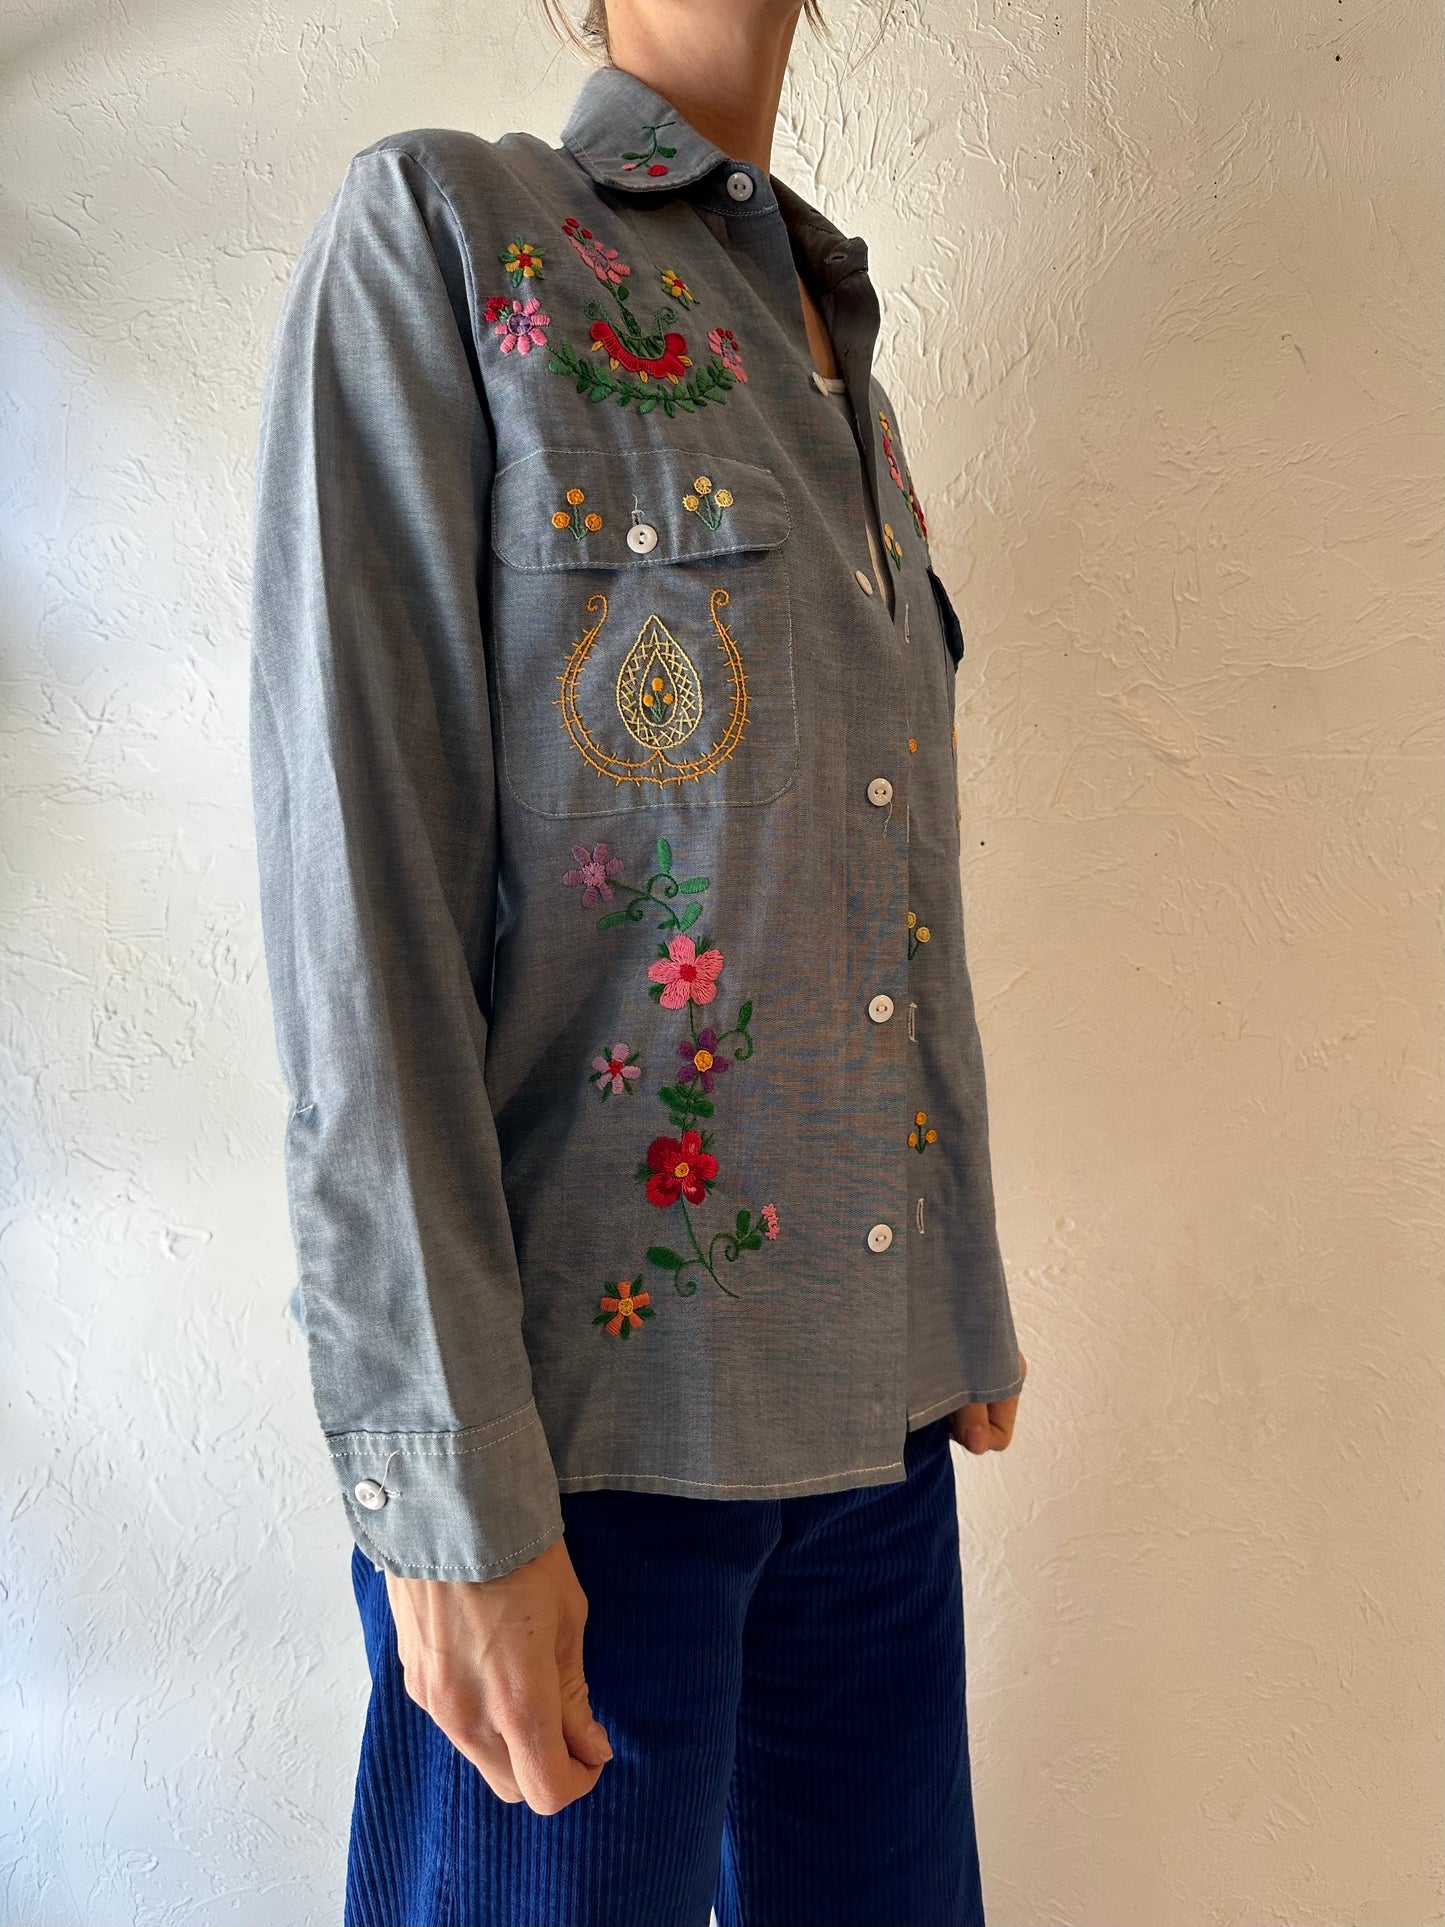 70s 'JC Penny' Embroidered Button Up Shirt / Medium